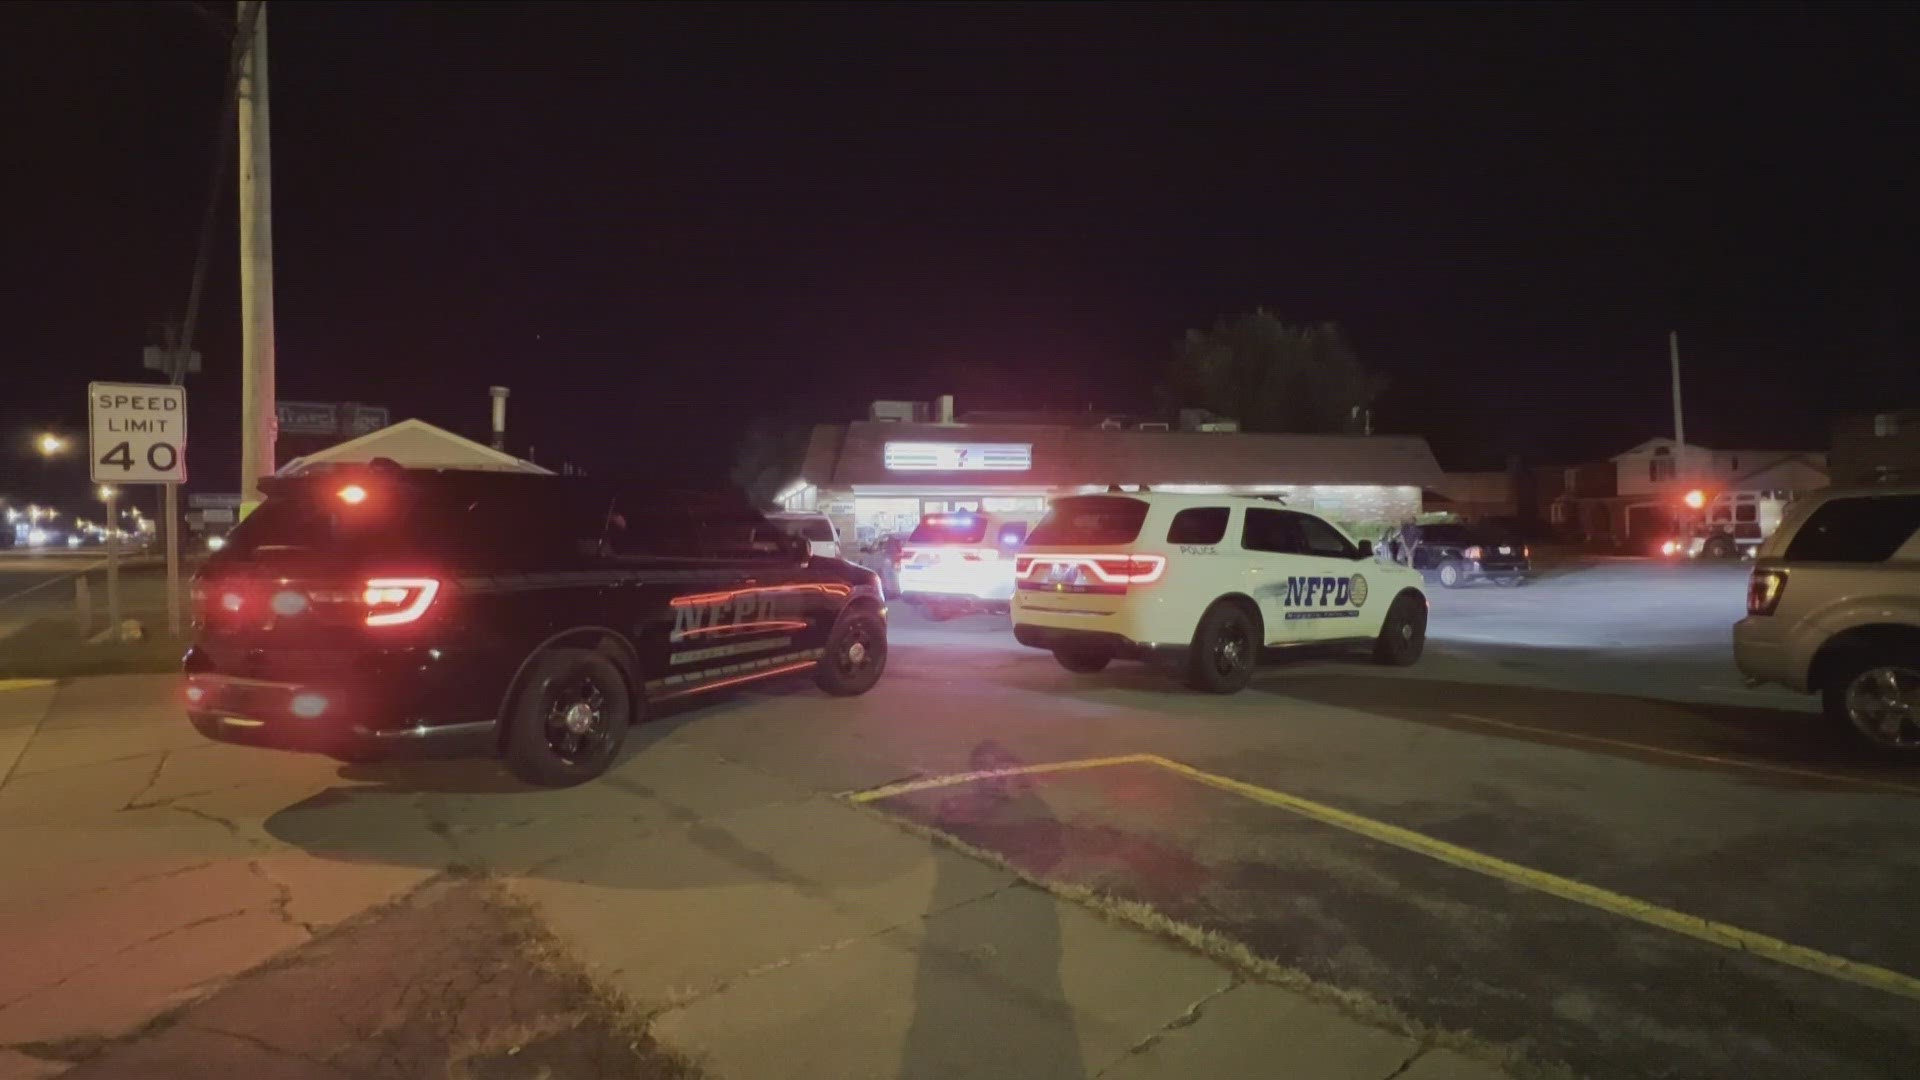 When police arrived at the scene they found a 30-year-old Niagara Falls man that had been stabbed multiple times.